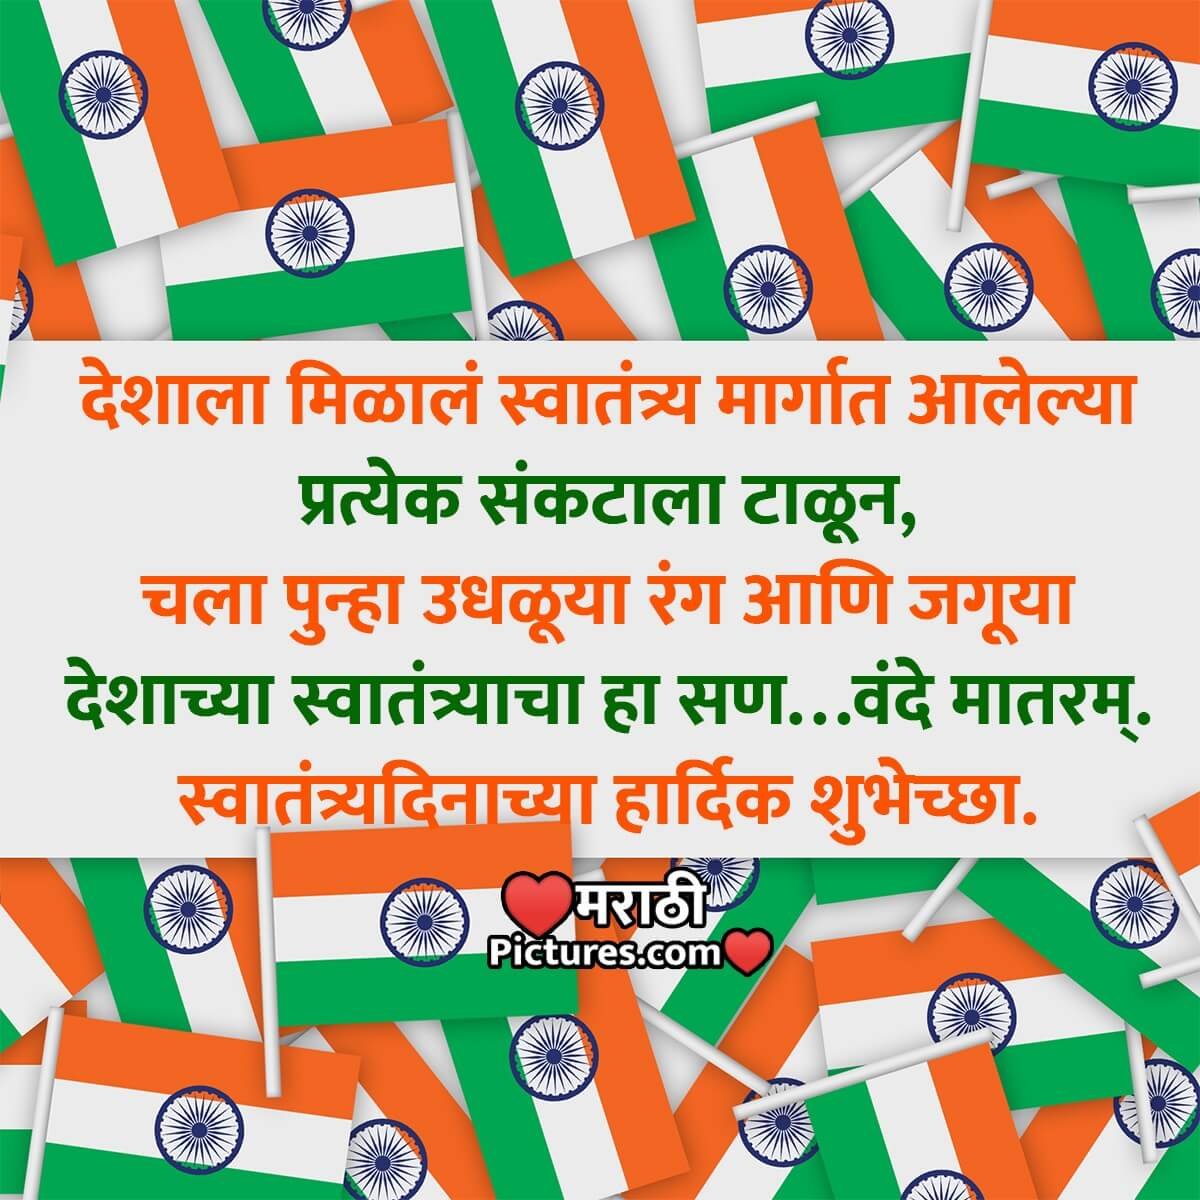 independence day essay in marathi 10 lines